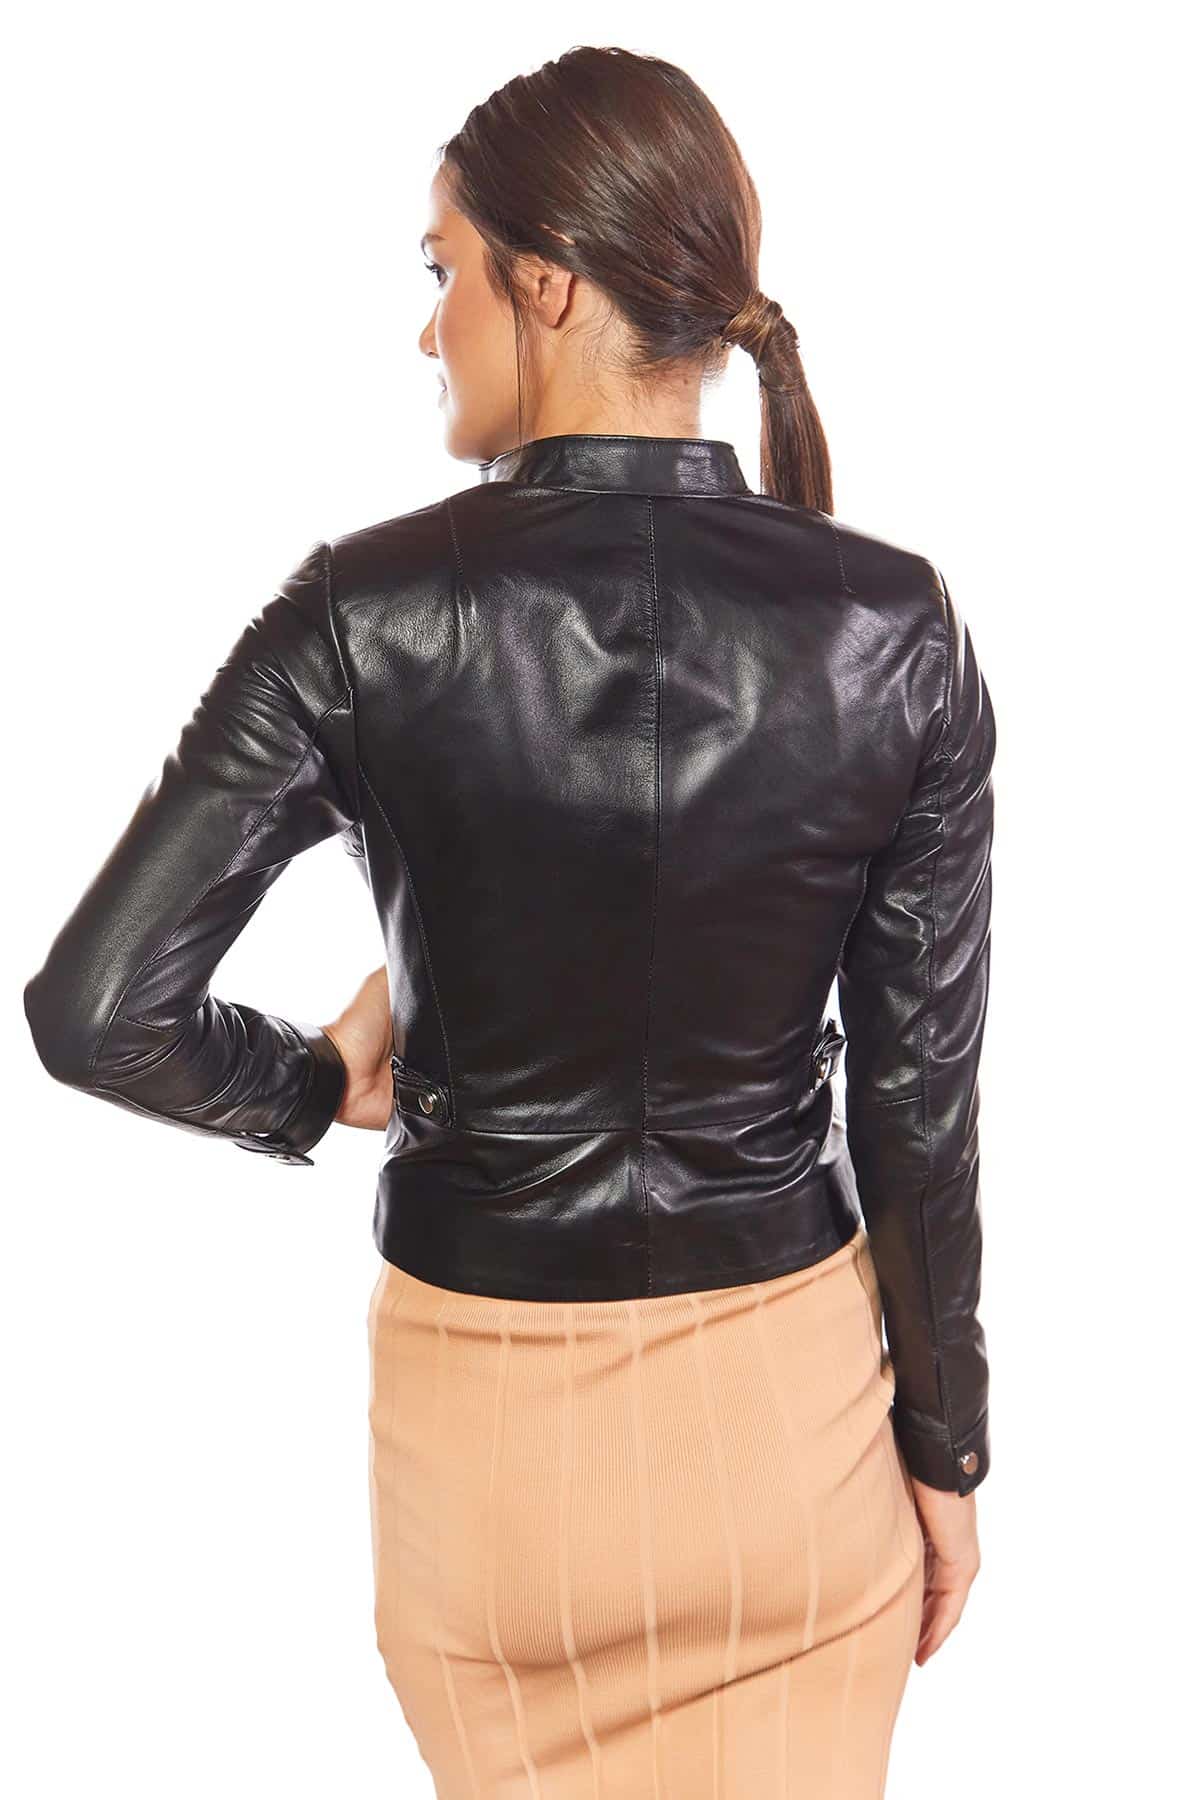 womens black leather jackets